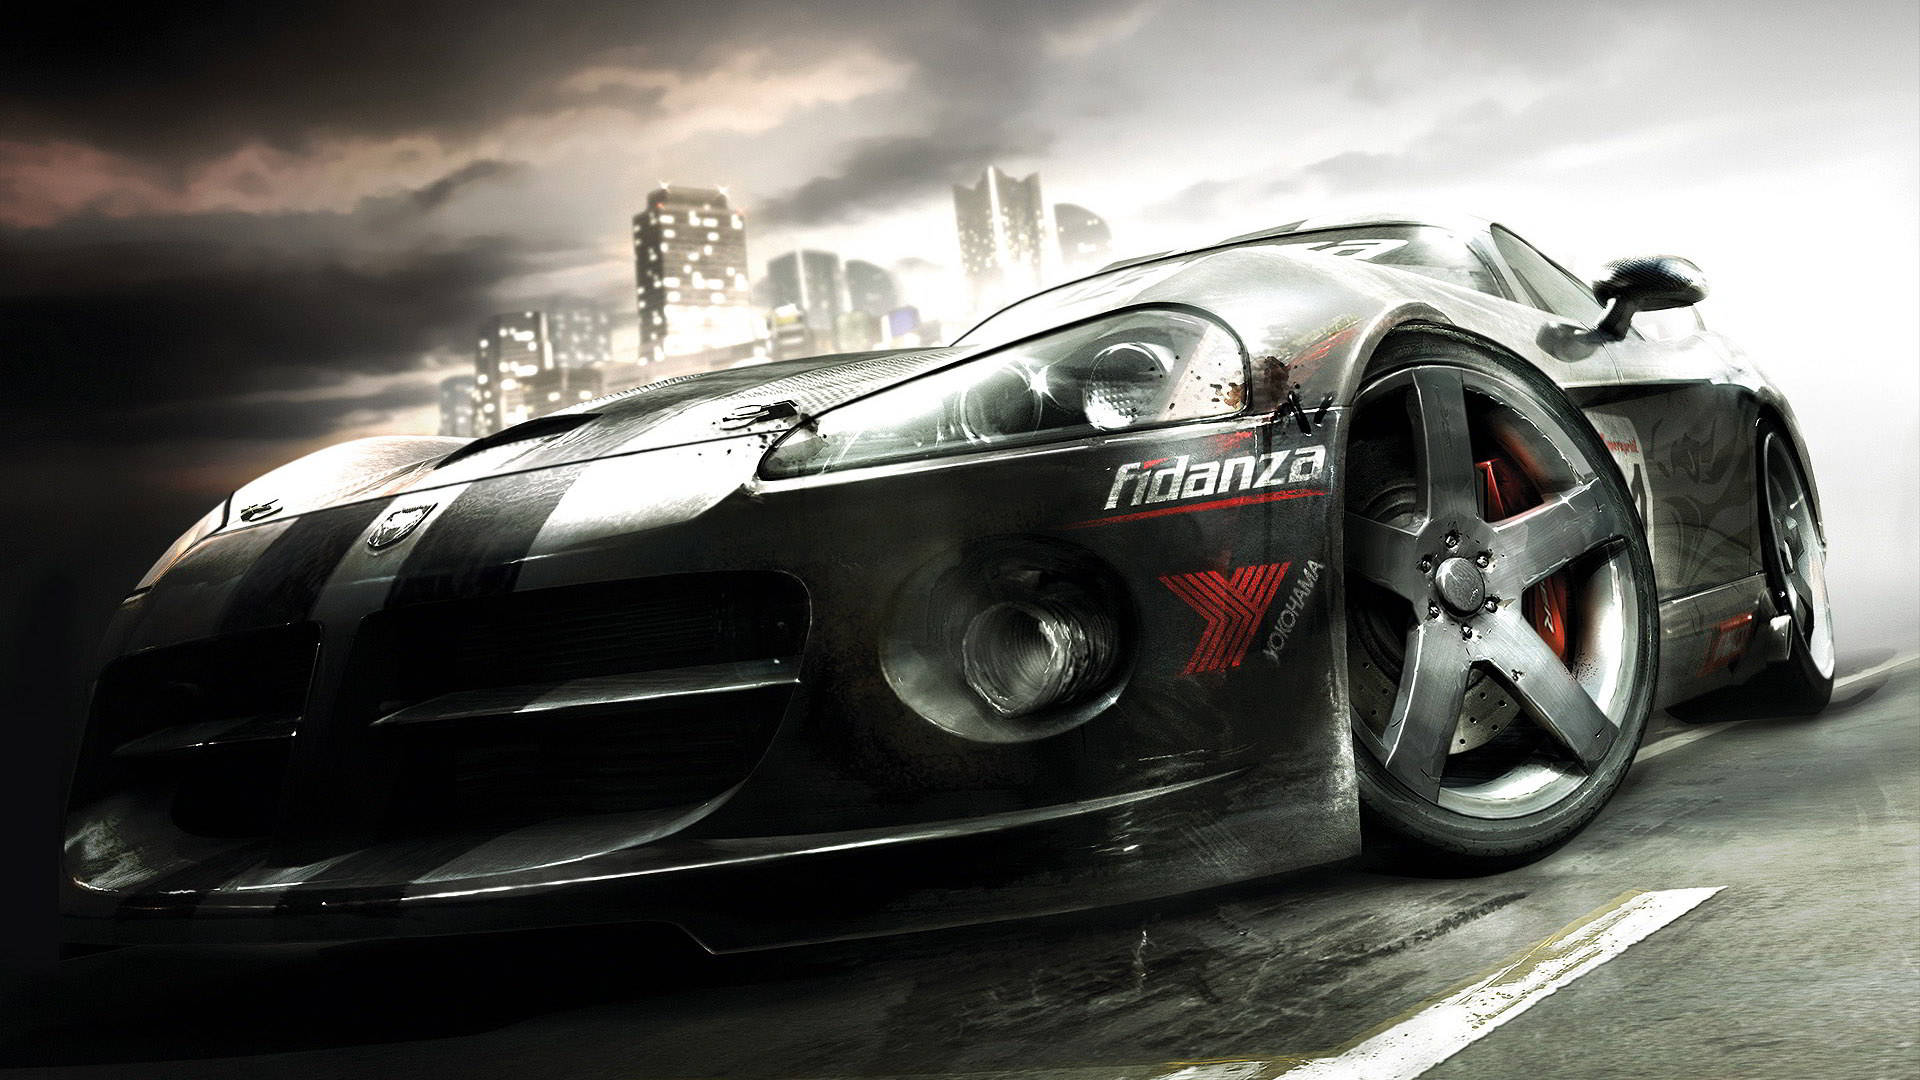 Grid 2 Black Car And Cloudy Skies Background